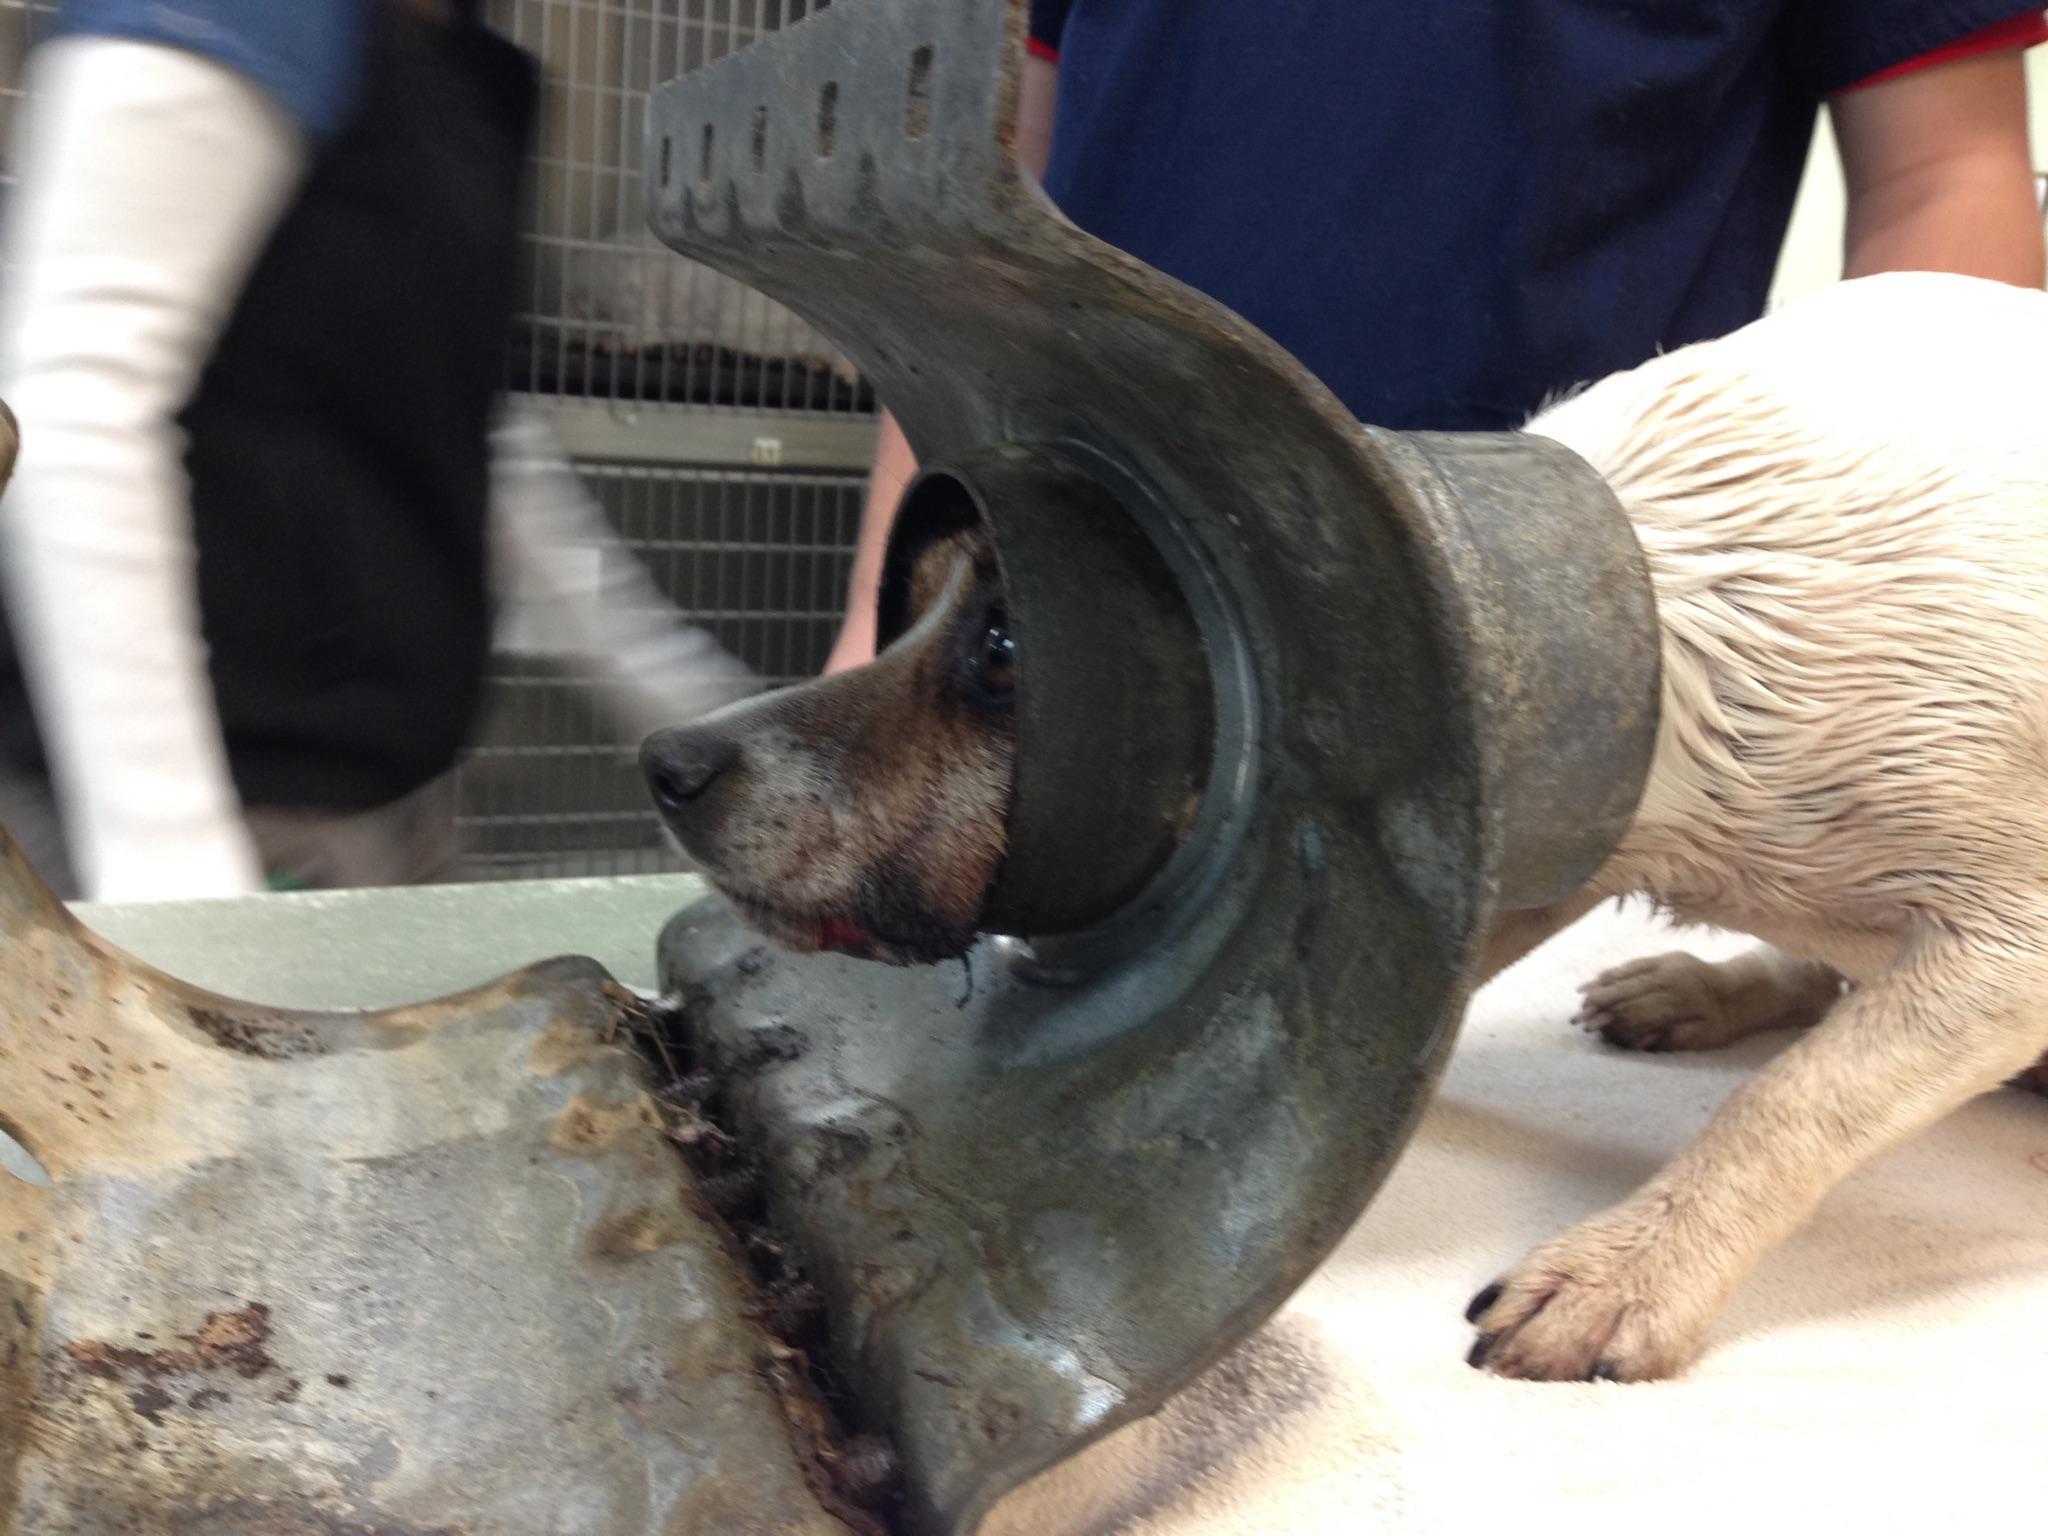 Dog rescued after getting its head stuck in pipe | ktvb.com